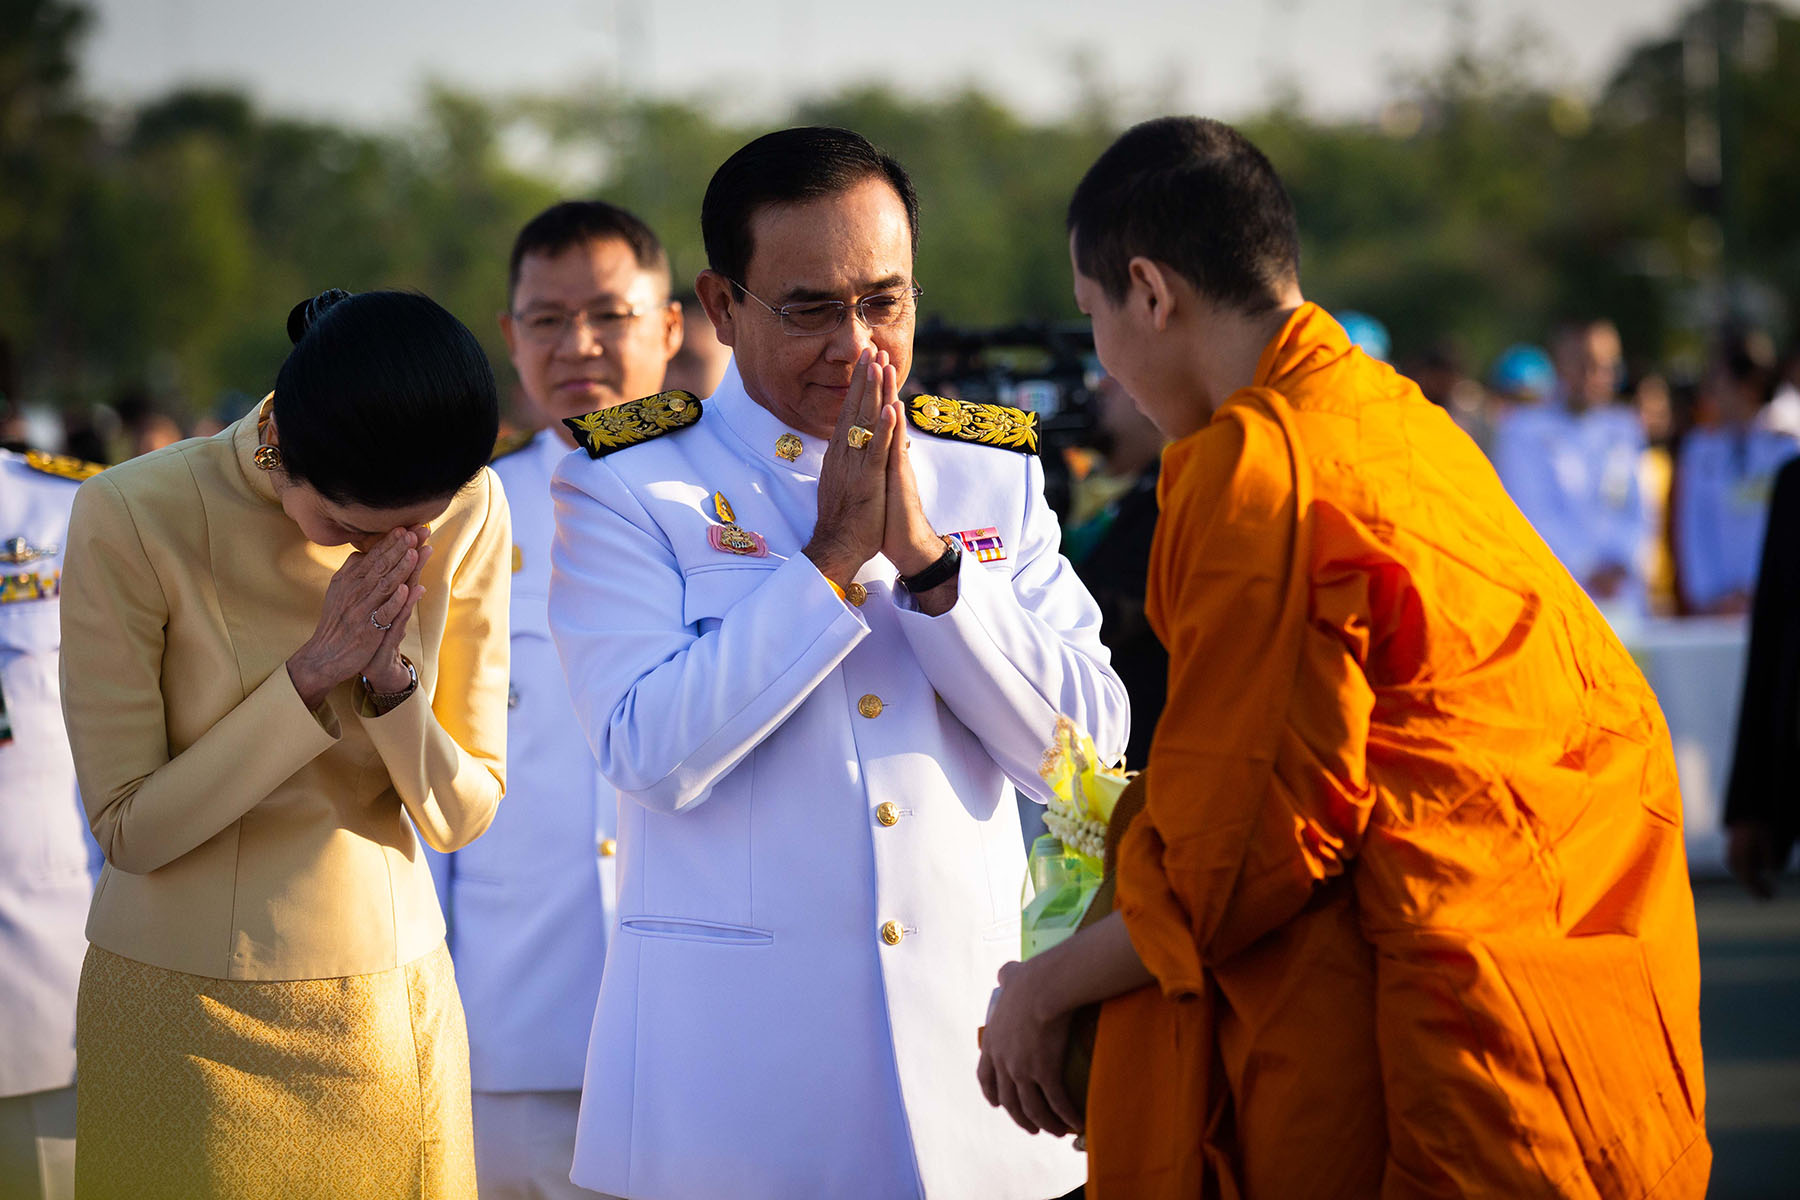 Former Prime Minister, General Prayut Chan-O-Cha waiing a monk during a commemorative ceremony for the late King Bhumibol's birthday at Sanam Luang, Thailand.